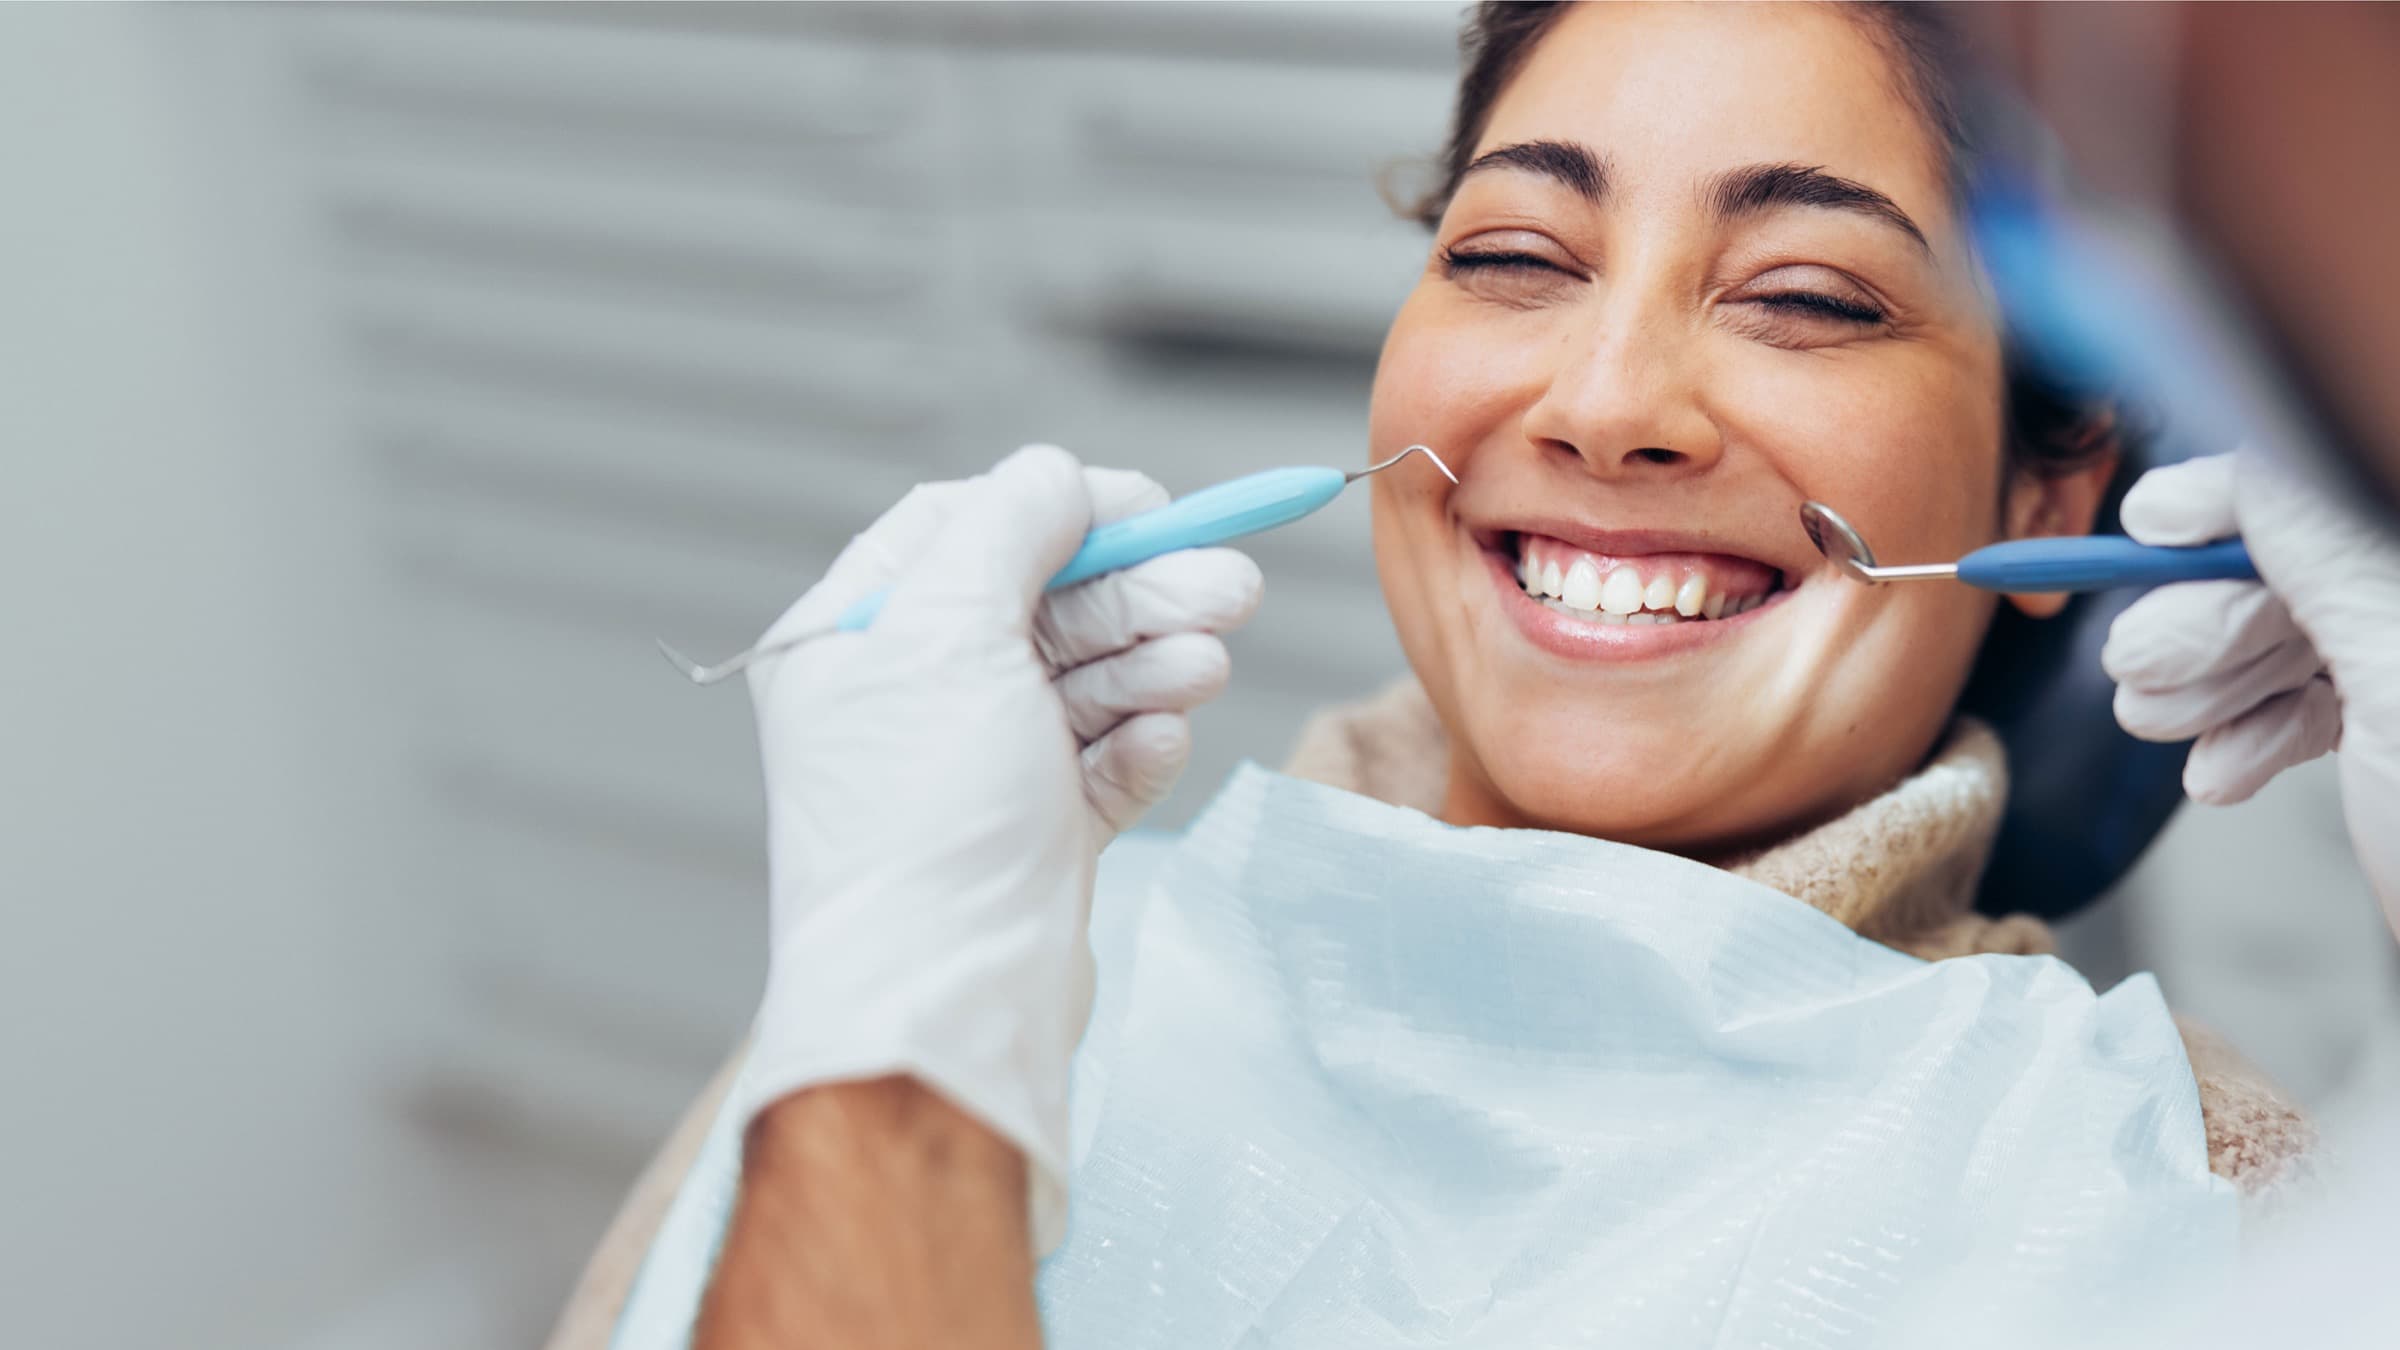 woman happy to be at the dentist